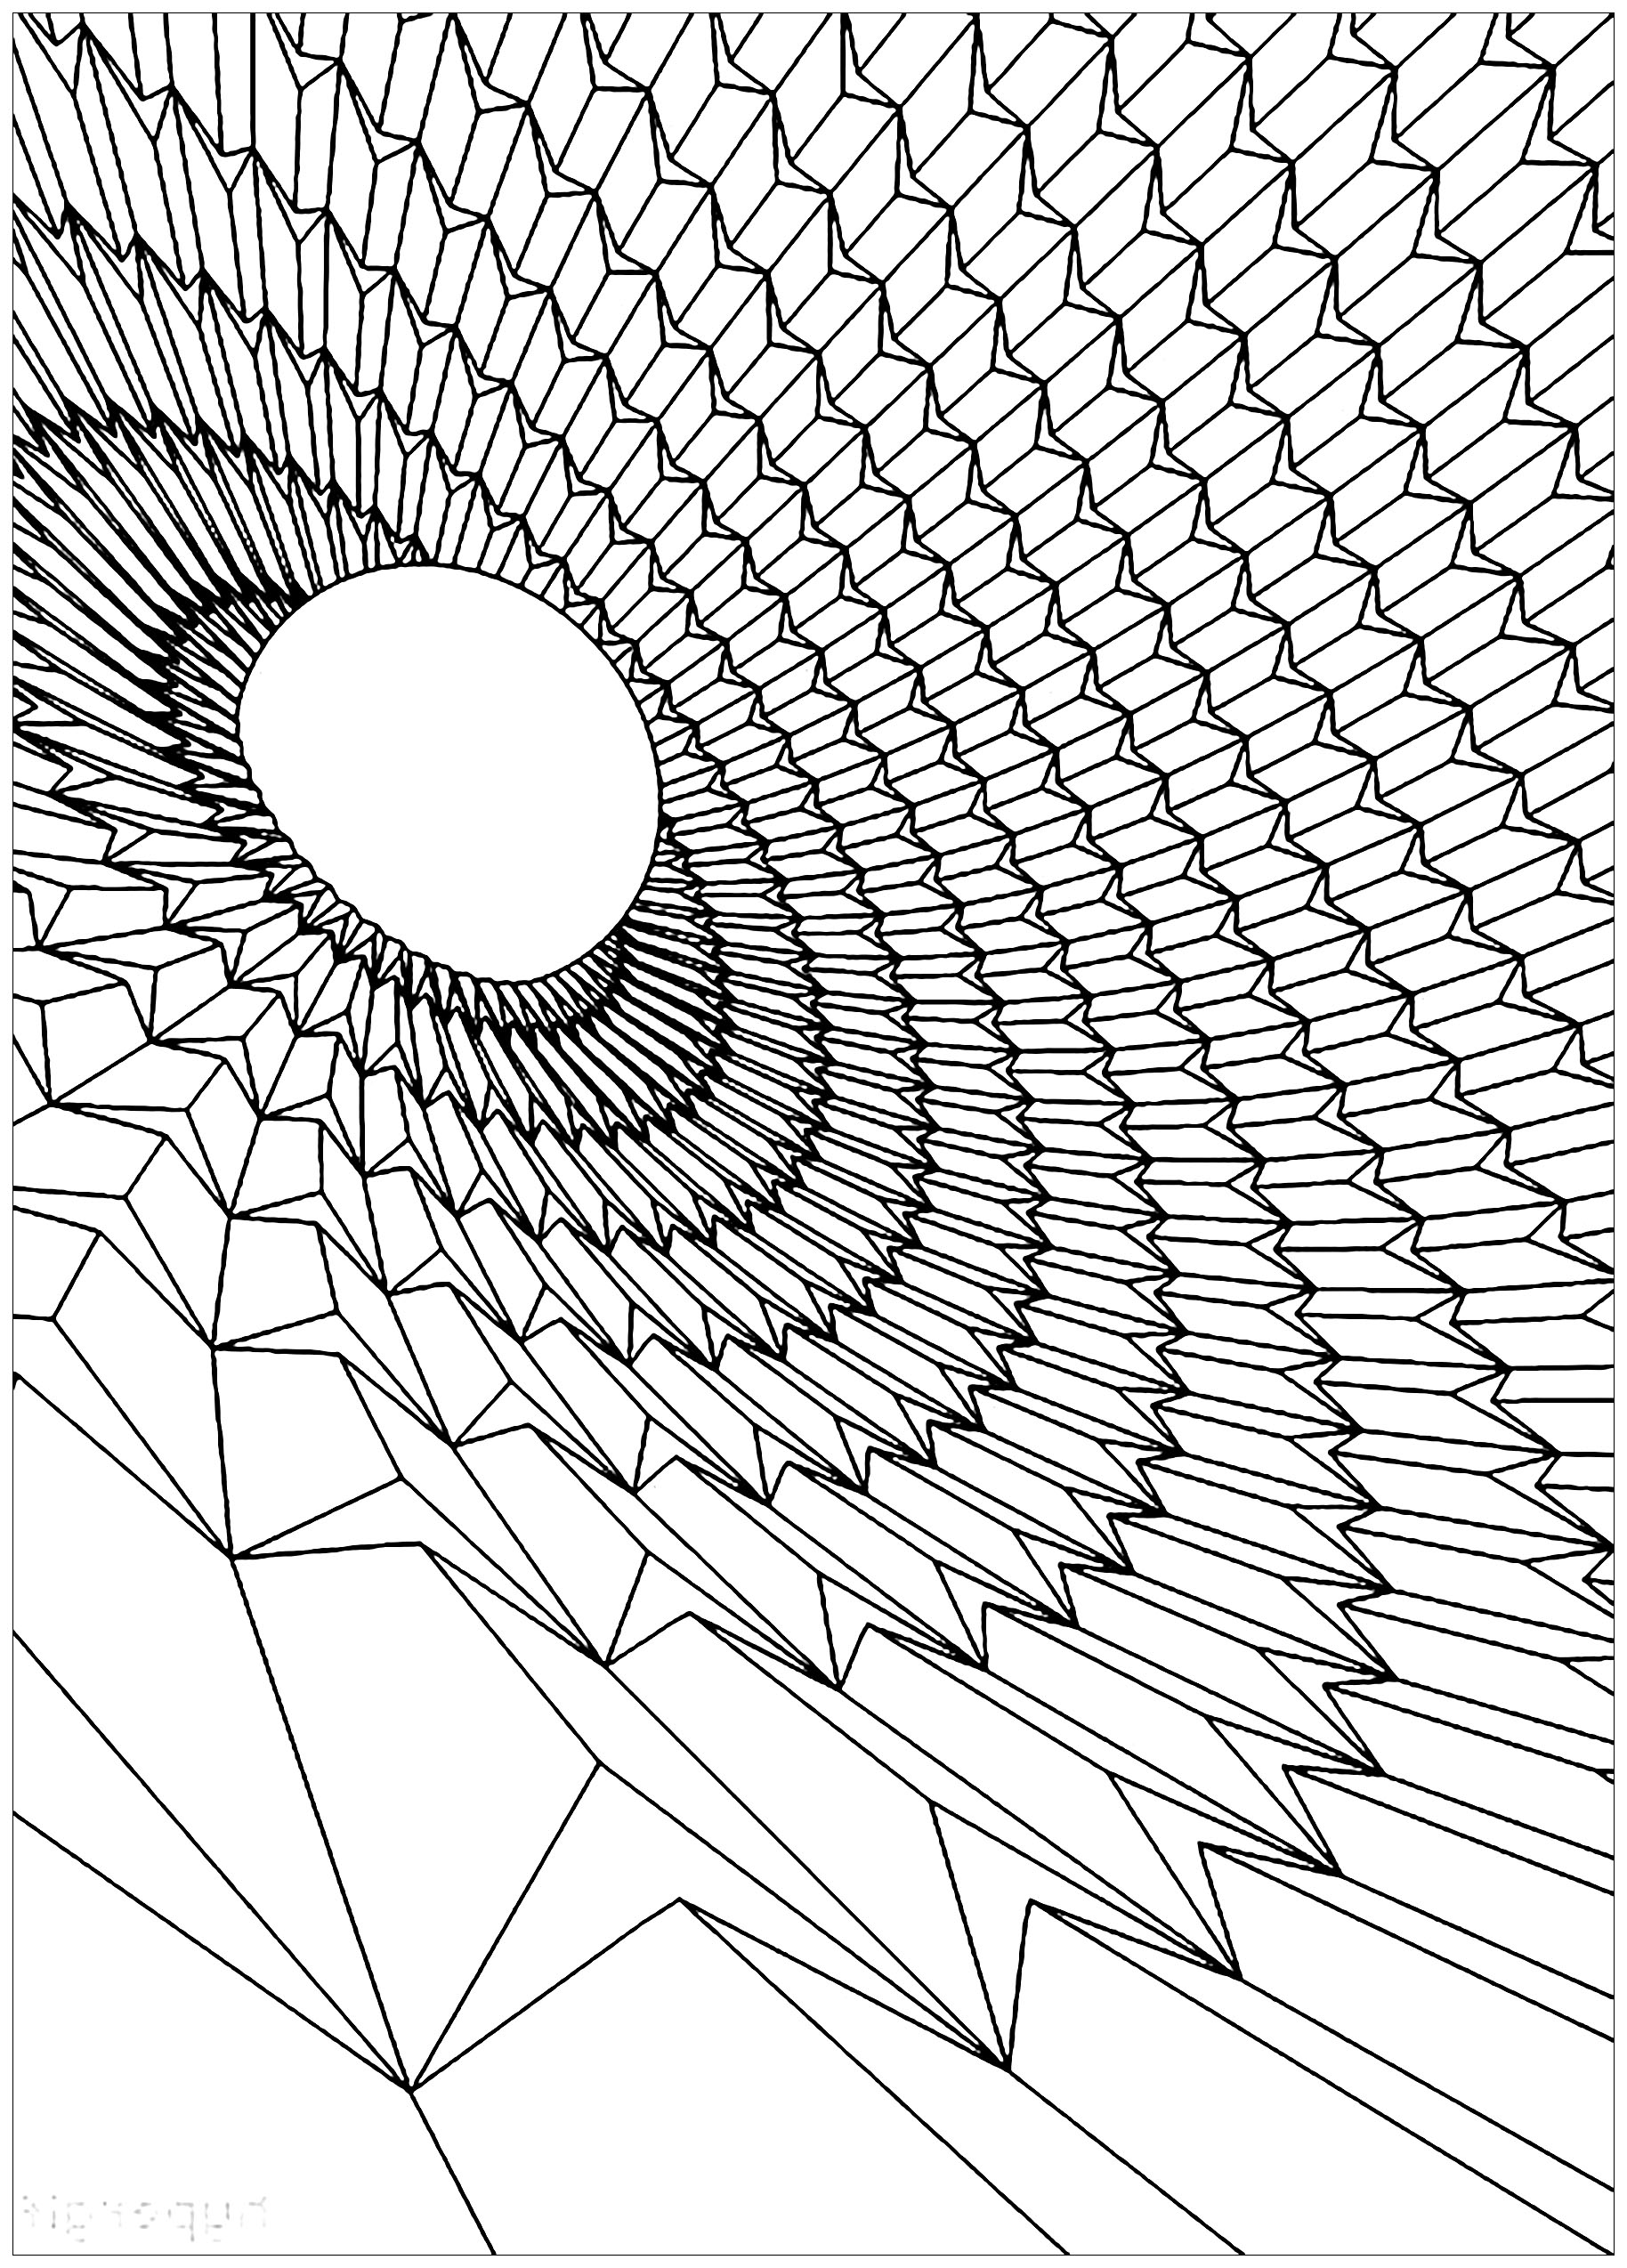 Black hole - Psychedelic Adult Coloring Pages